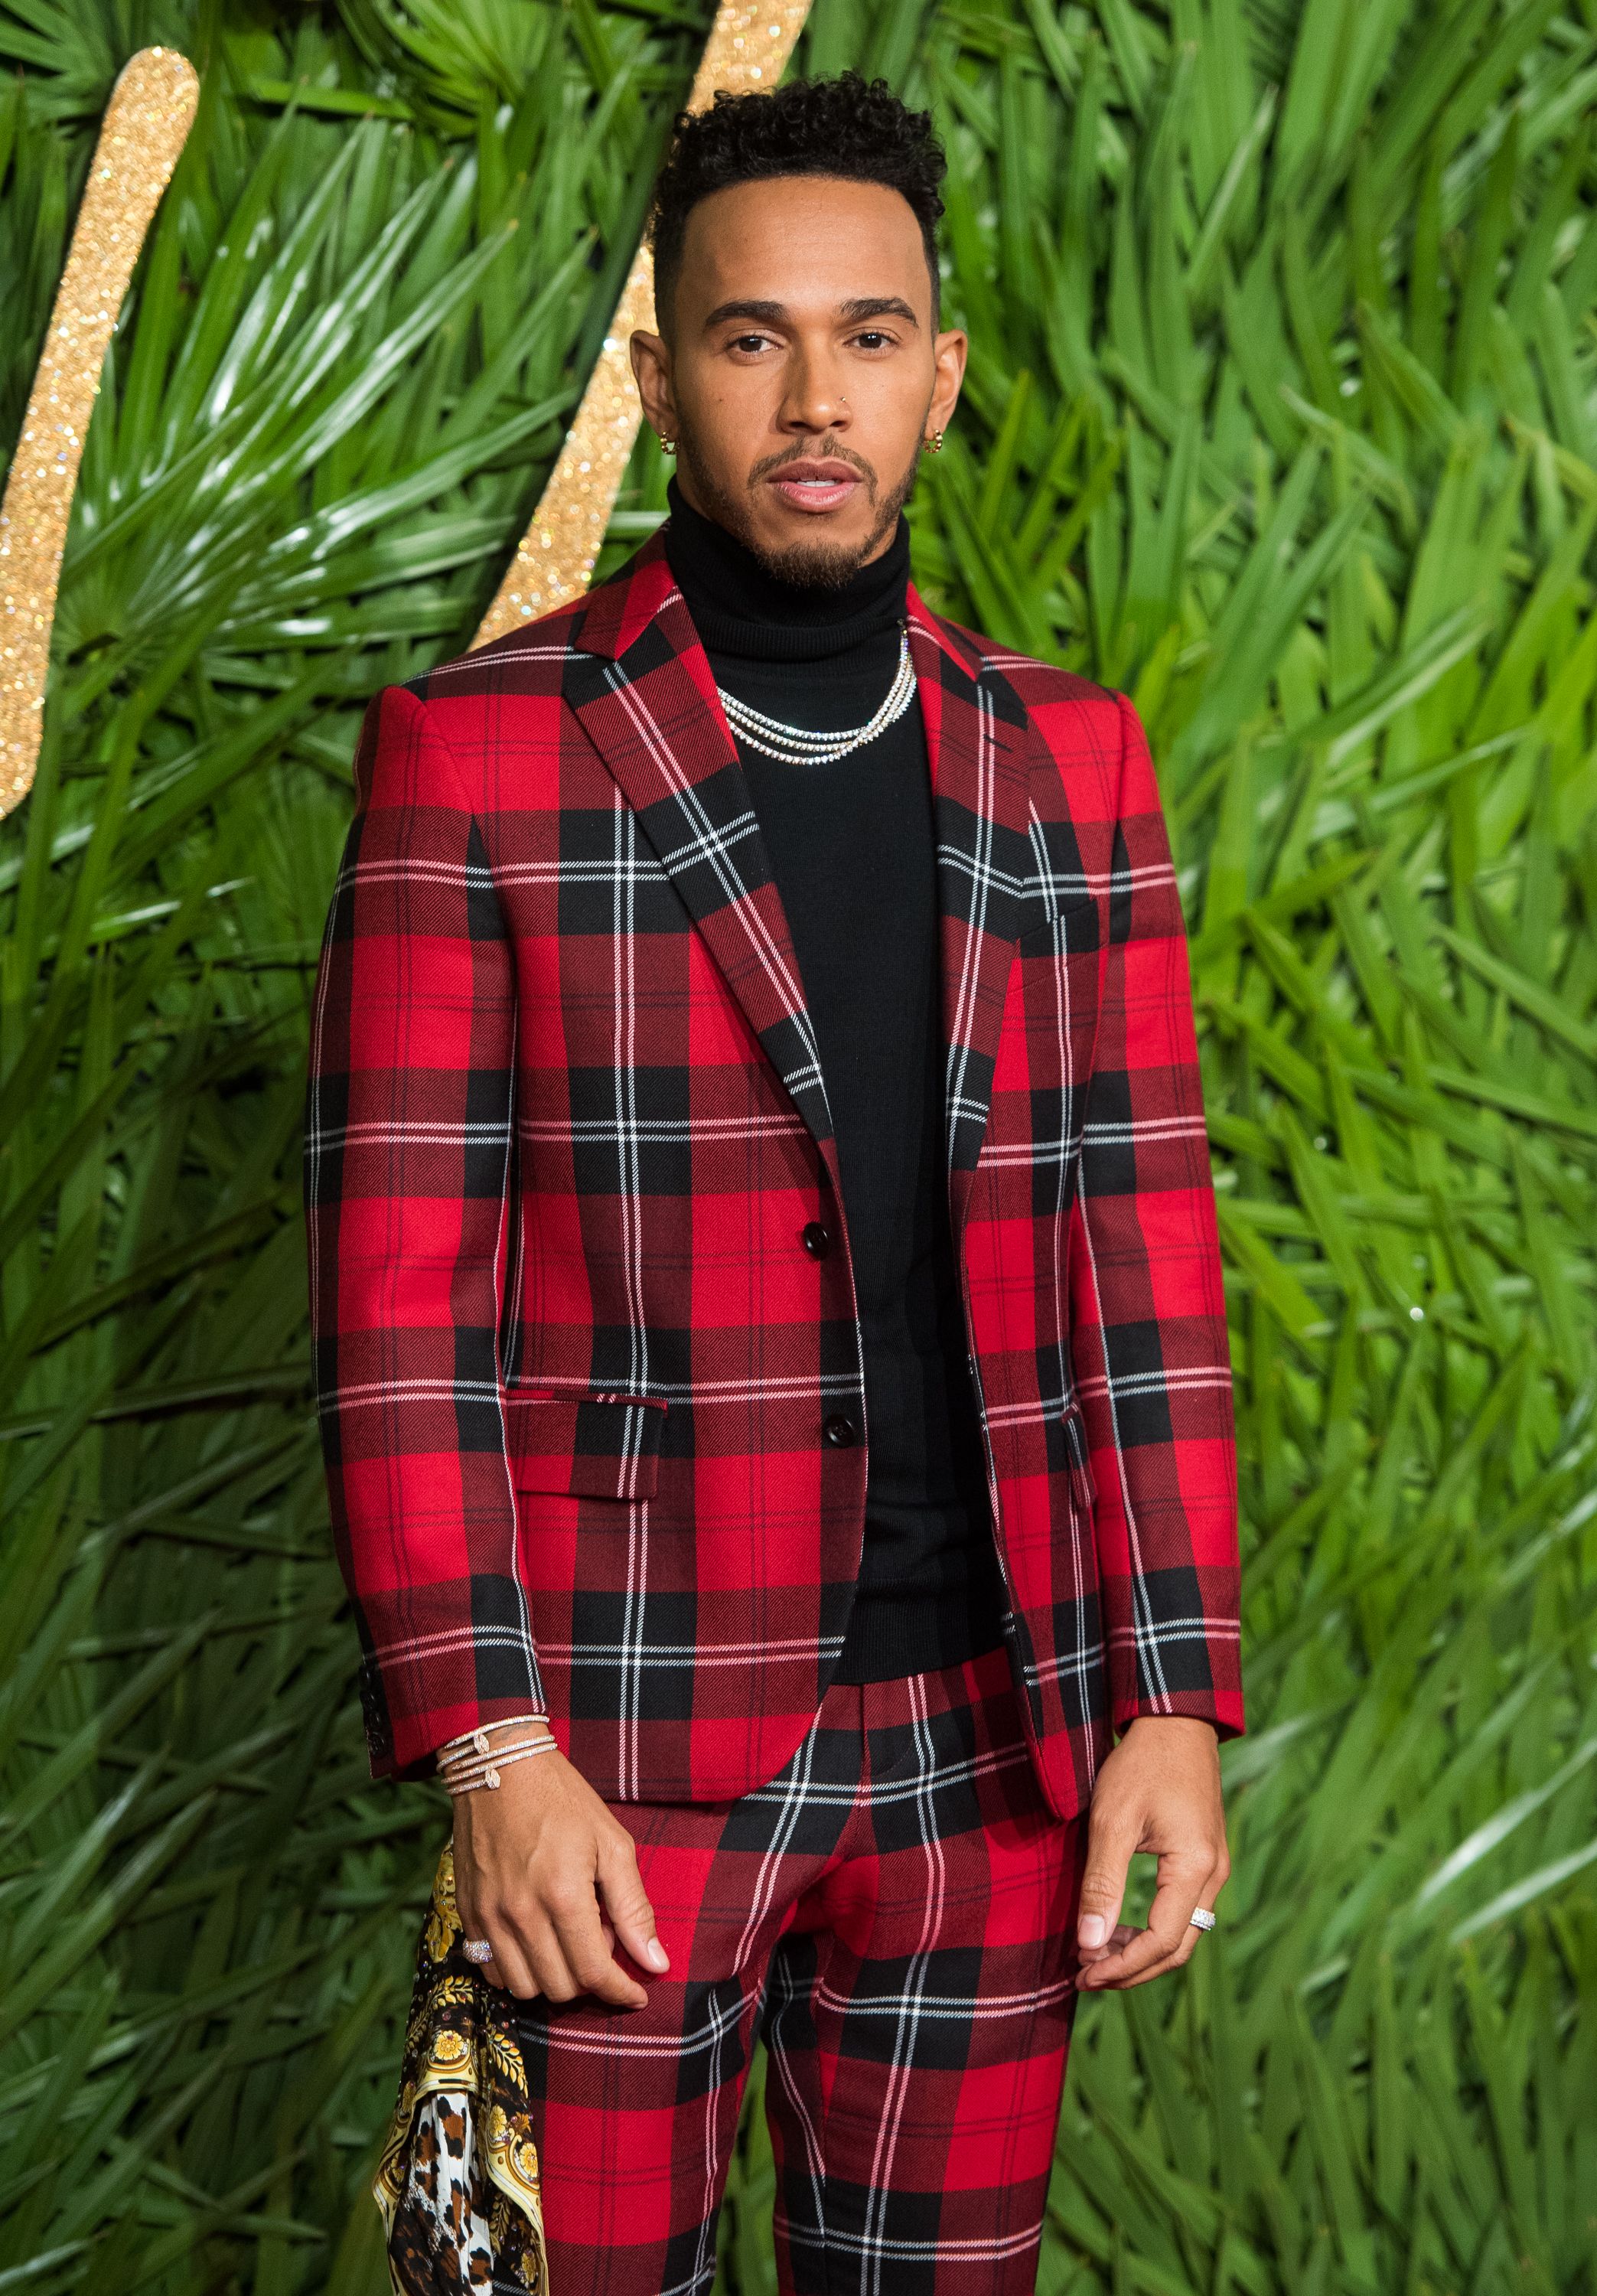 Before Rumored Hair Transplant, Lewis Hamilton Revealed the Disastrous  Decision That “Killed” His Hair - EssentiallySports